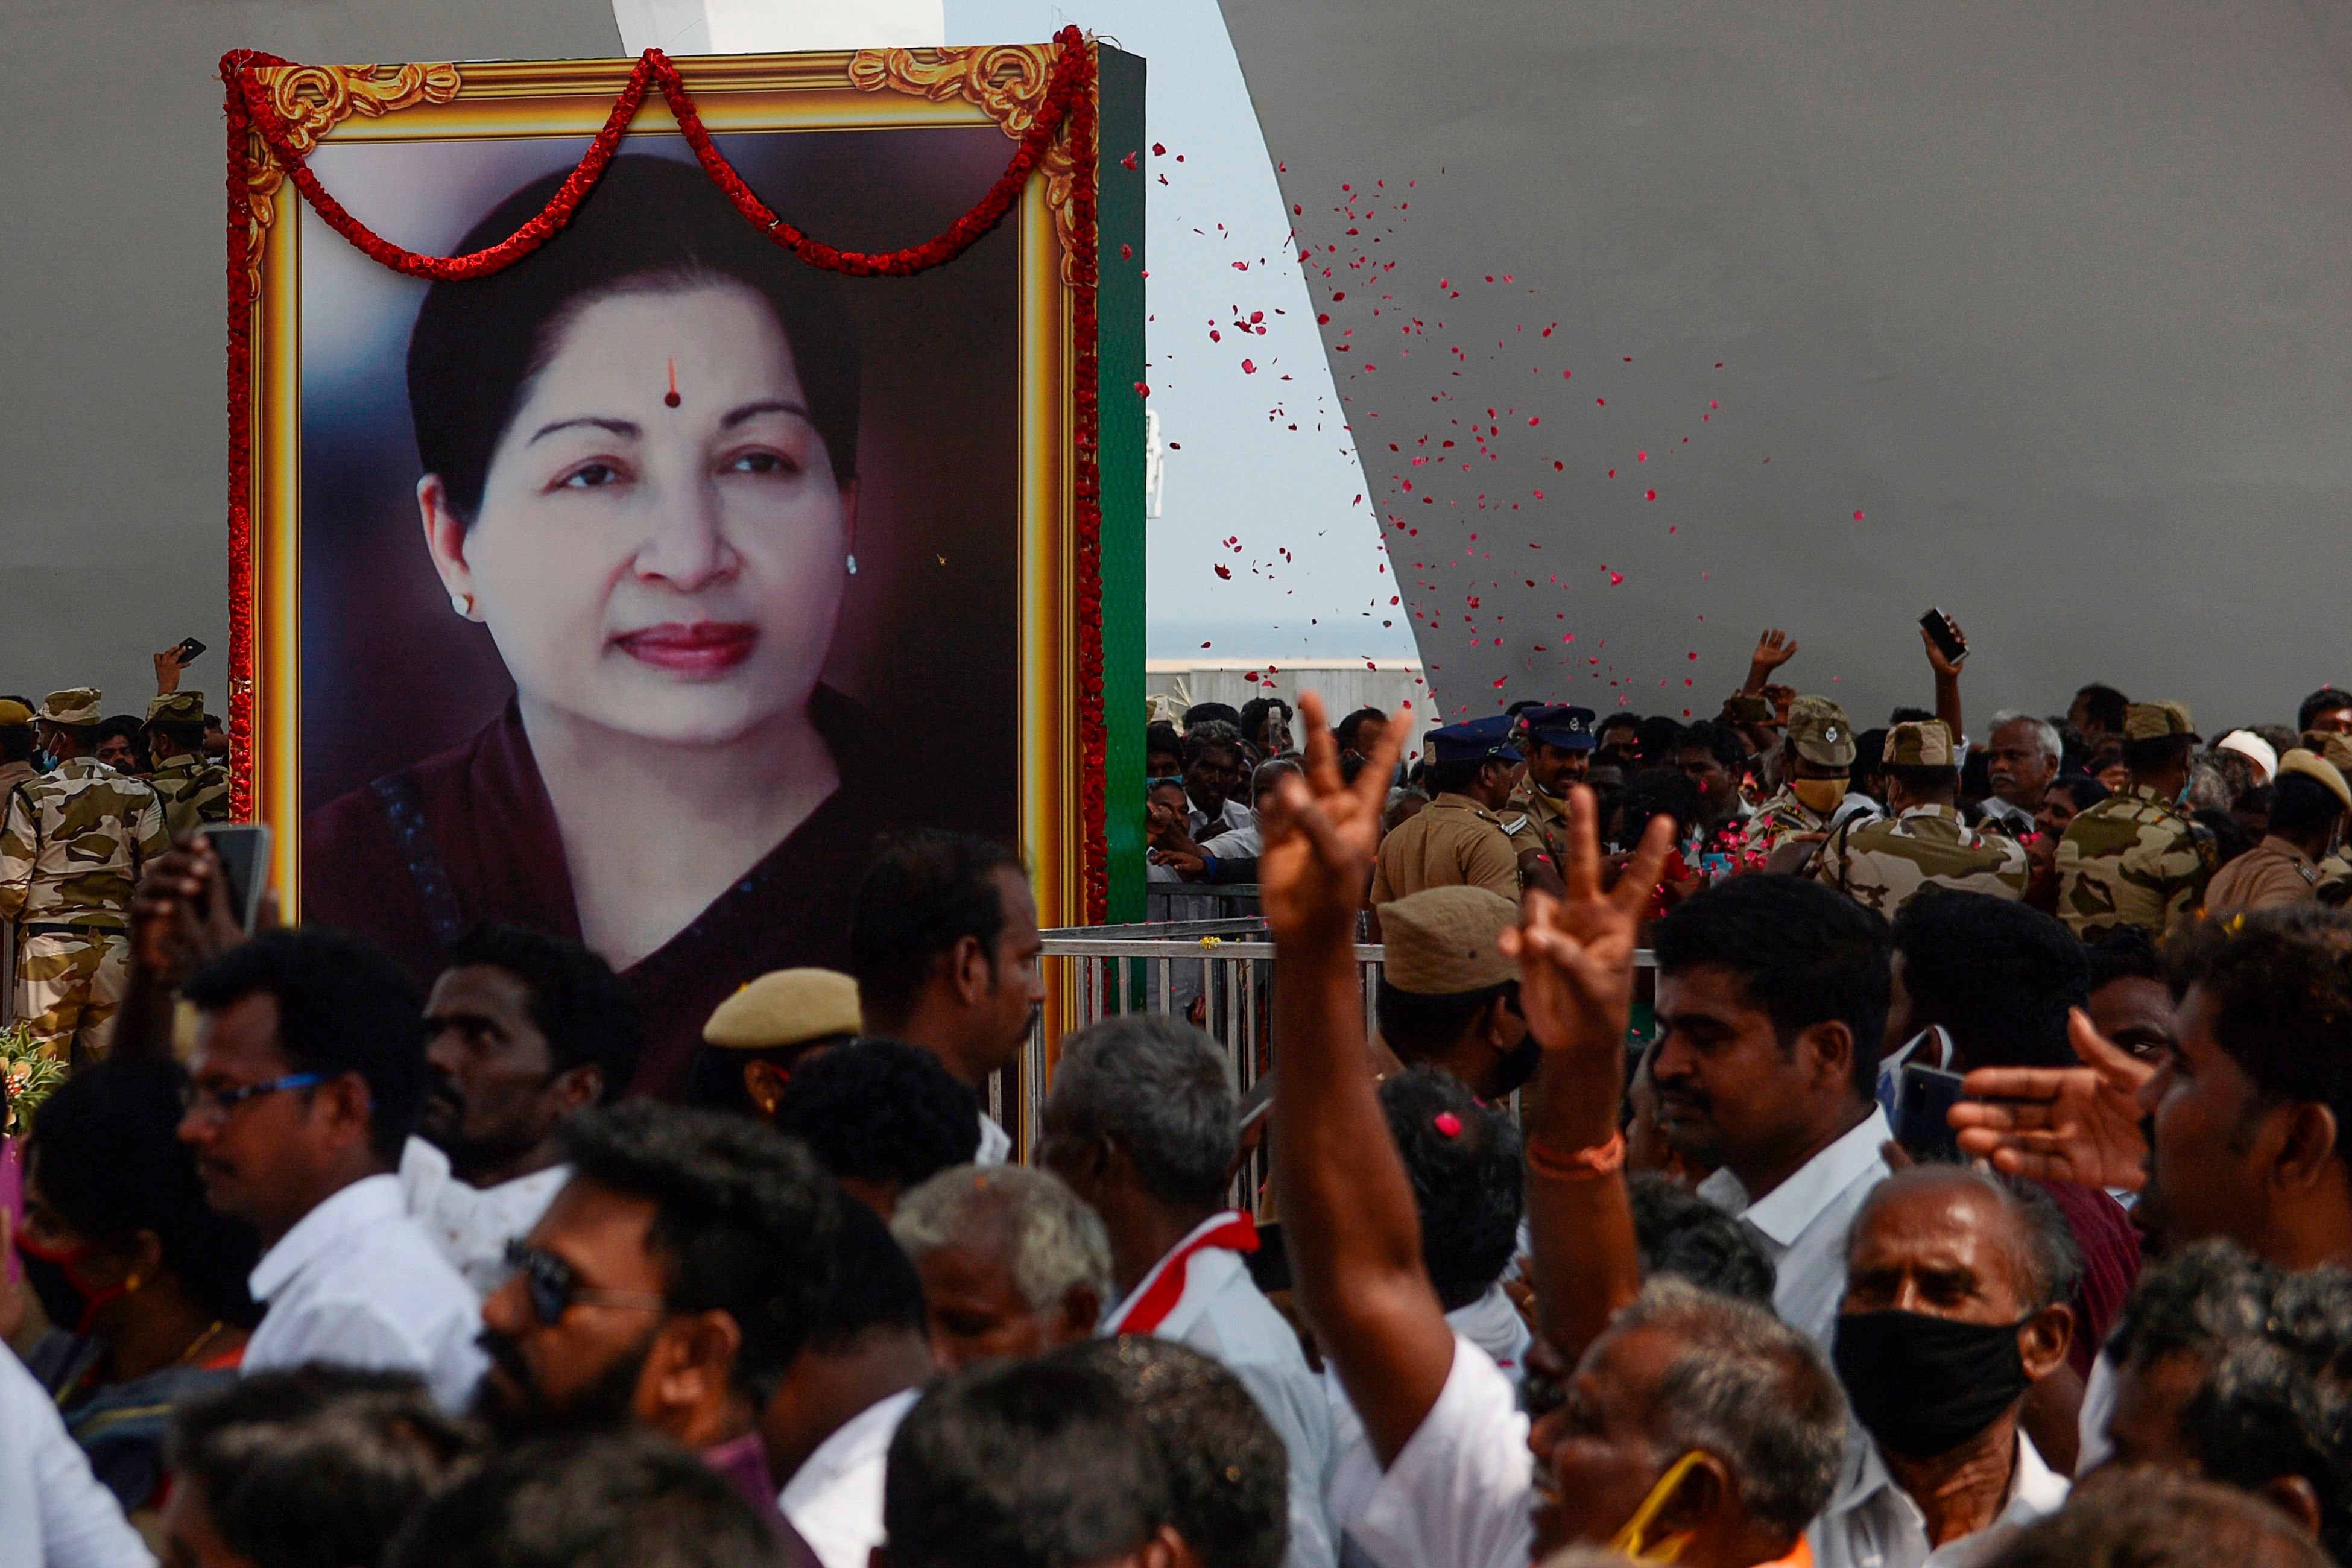 Carders of All India Anna Dravida Munnetra Kazhagam (AIADMK) party gather during the inauguration ceremony of the memorial for late Tamil Nadu Chief Minister J. Jayalalithaa, in Chennai on January 27, 2021. Credit: AFP Photo